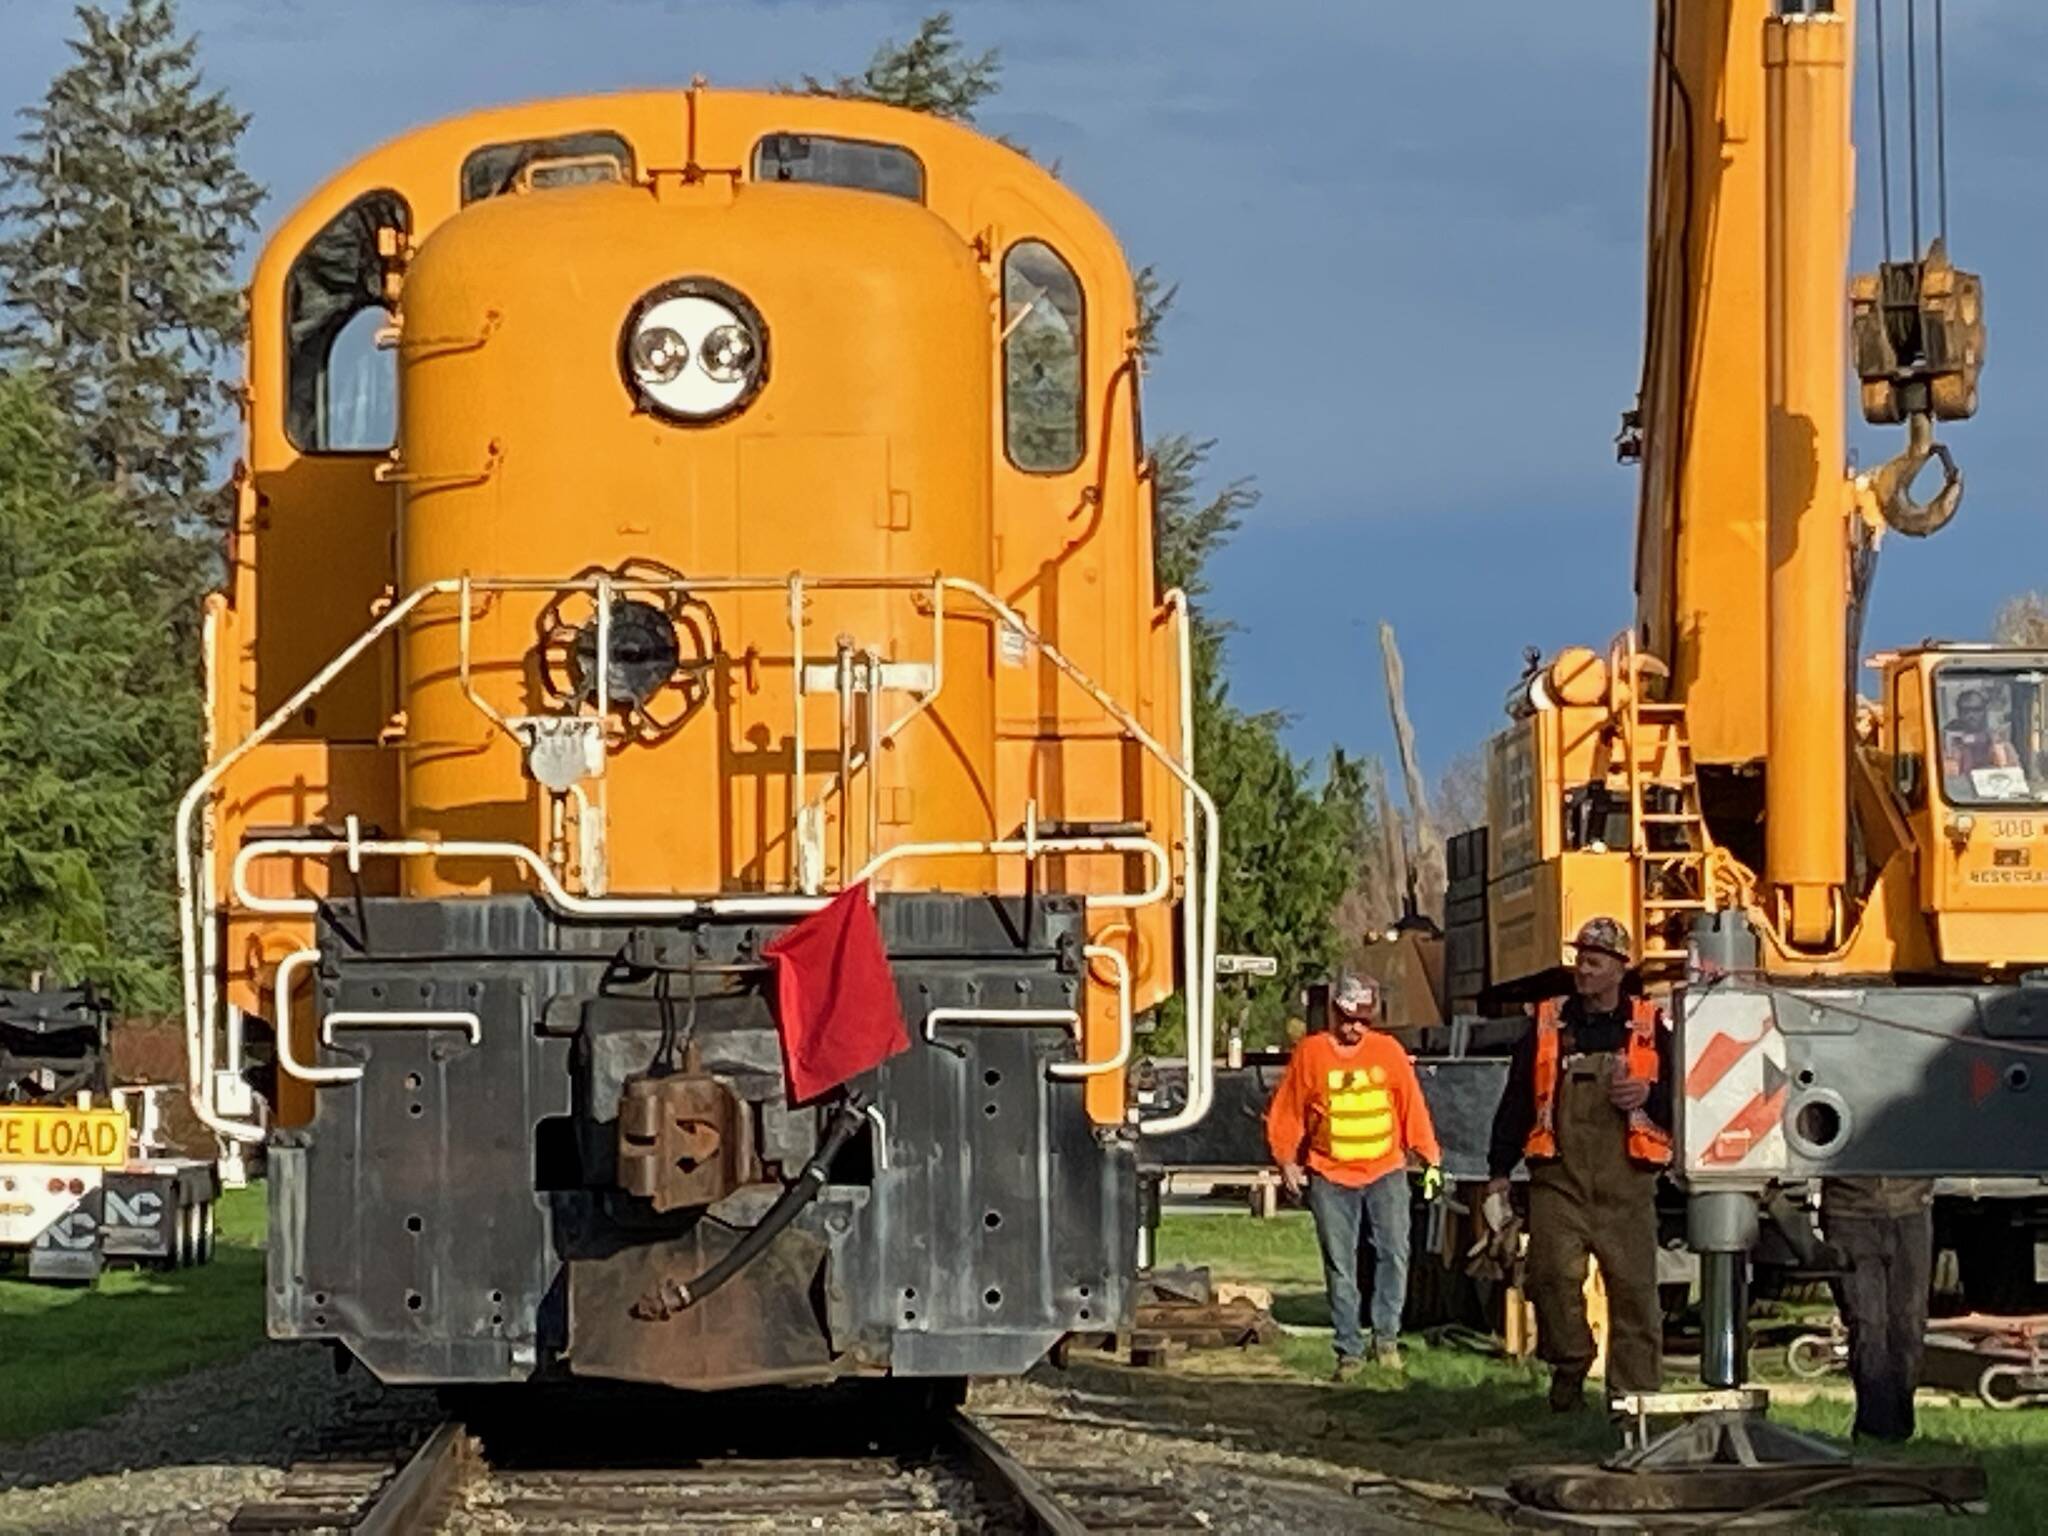 Workers prepare to move Locomotive 201 from the Northwest Railway Museum in Snoqualmie on Nov. 3. The locomotive is being moved to the Nevada Northern Railway Foundation, near where it operated until the 1980s. Photo William Shaw/Valley Record.